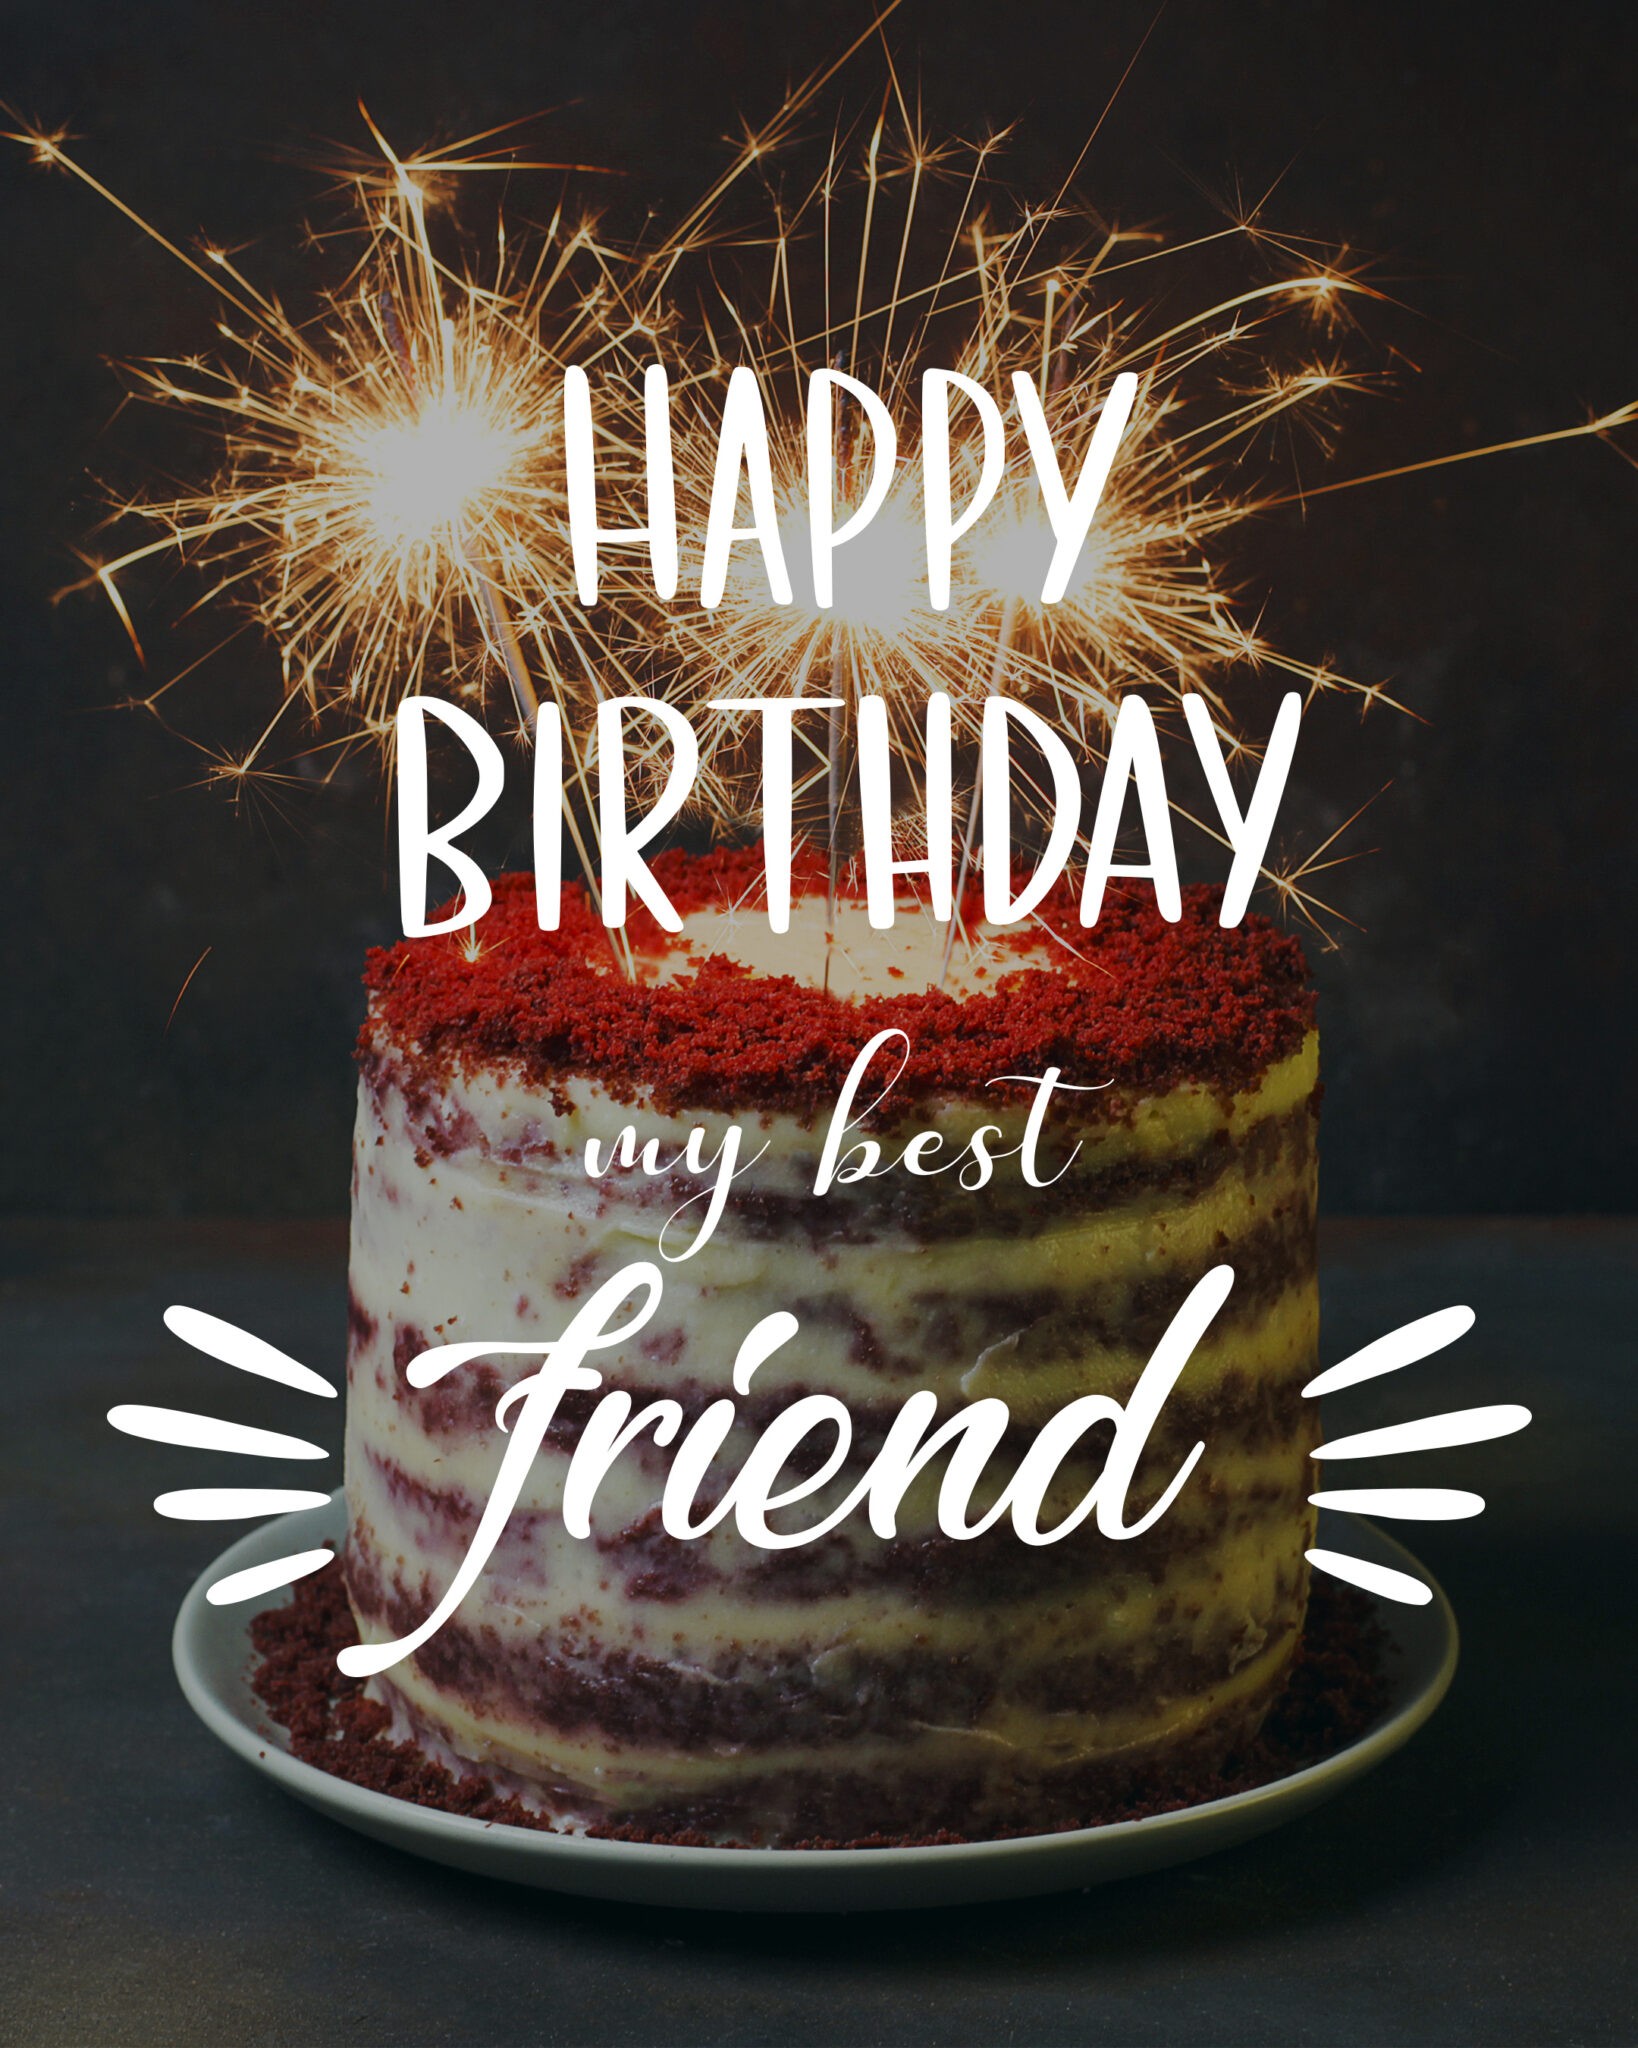 Free Happy Birthday Image For Friend With Cake